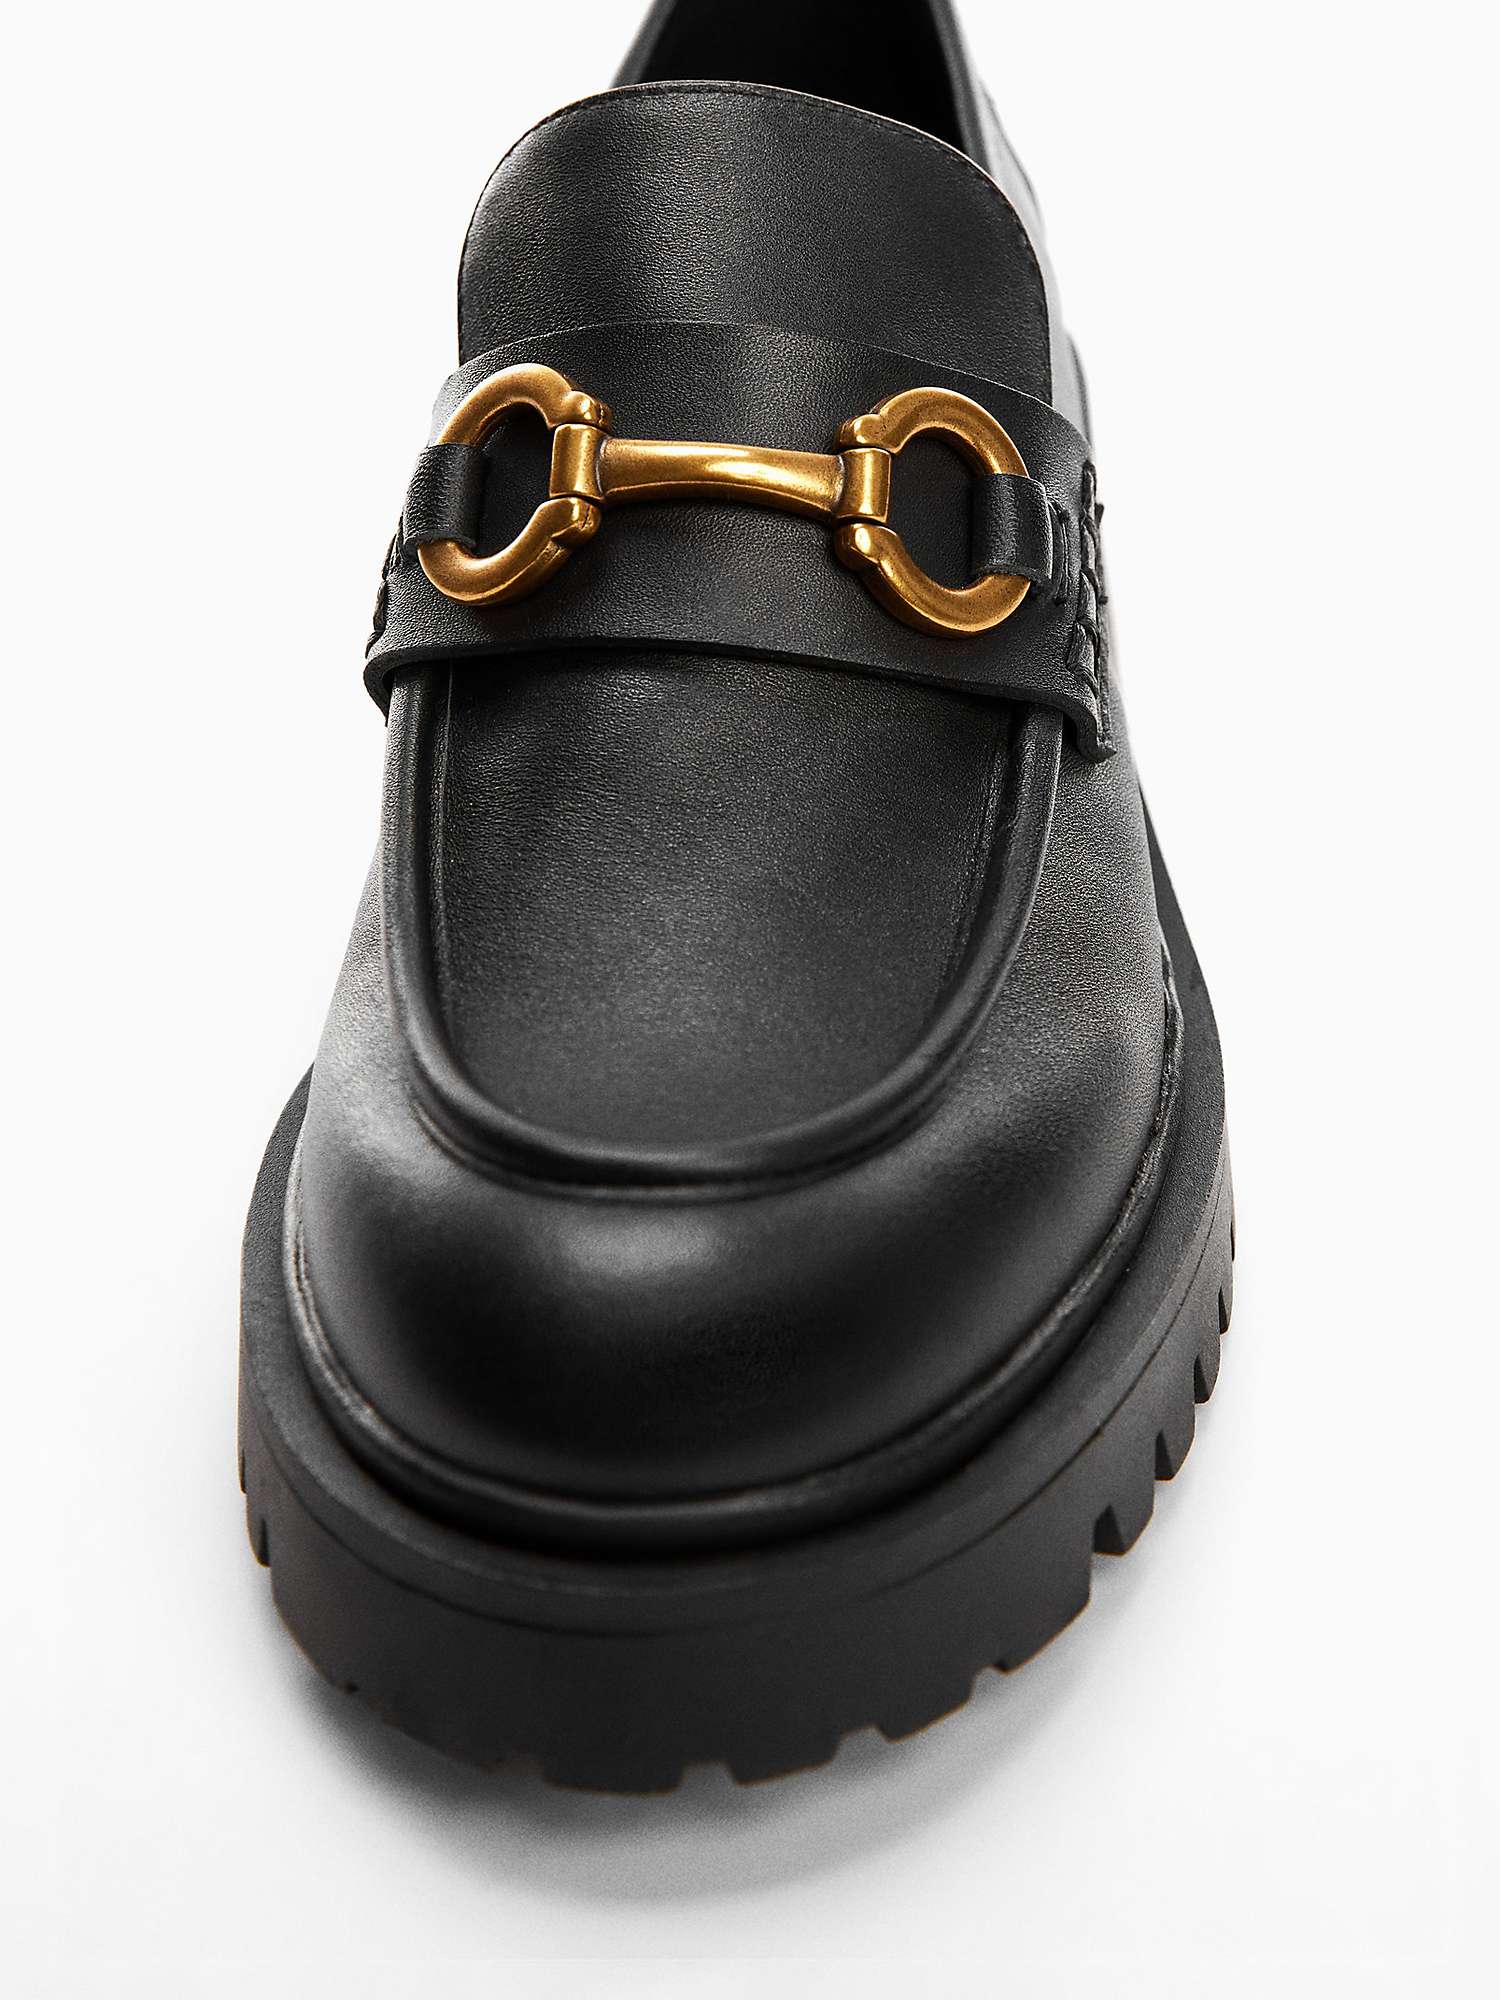 Buy Mango Chus Leather Loafers, Black Online at johnlewis.com